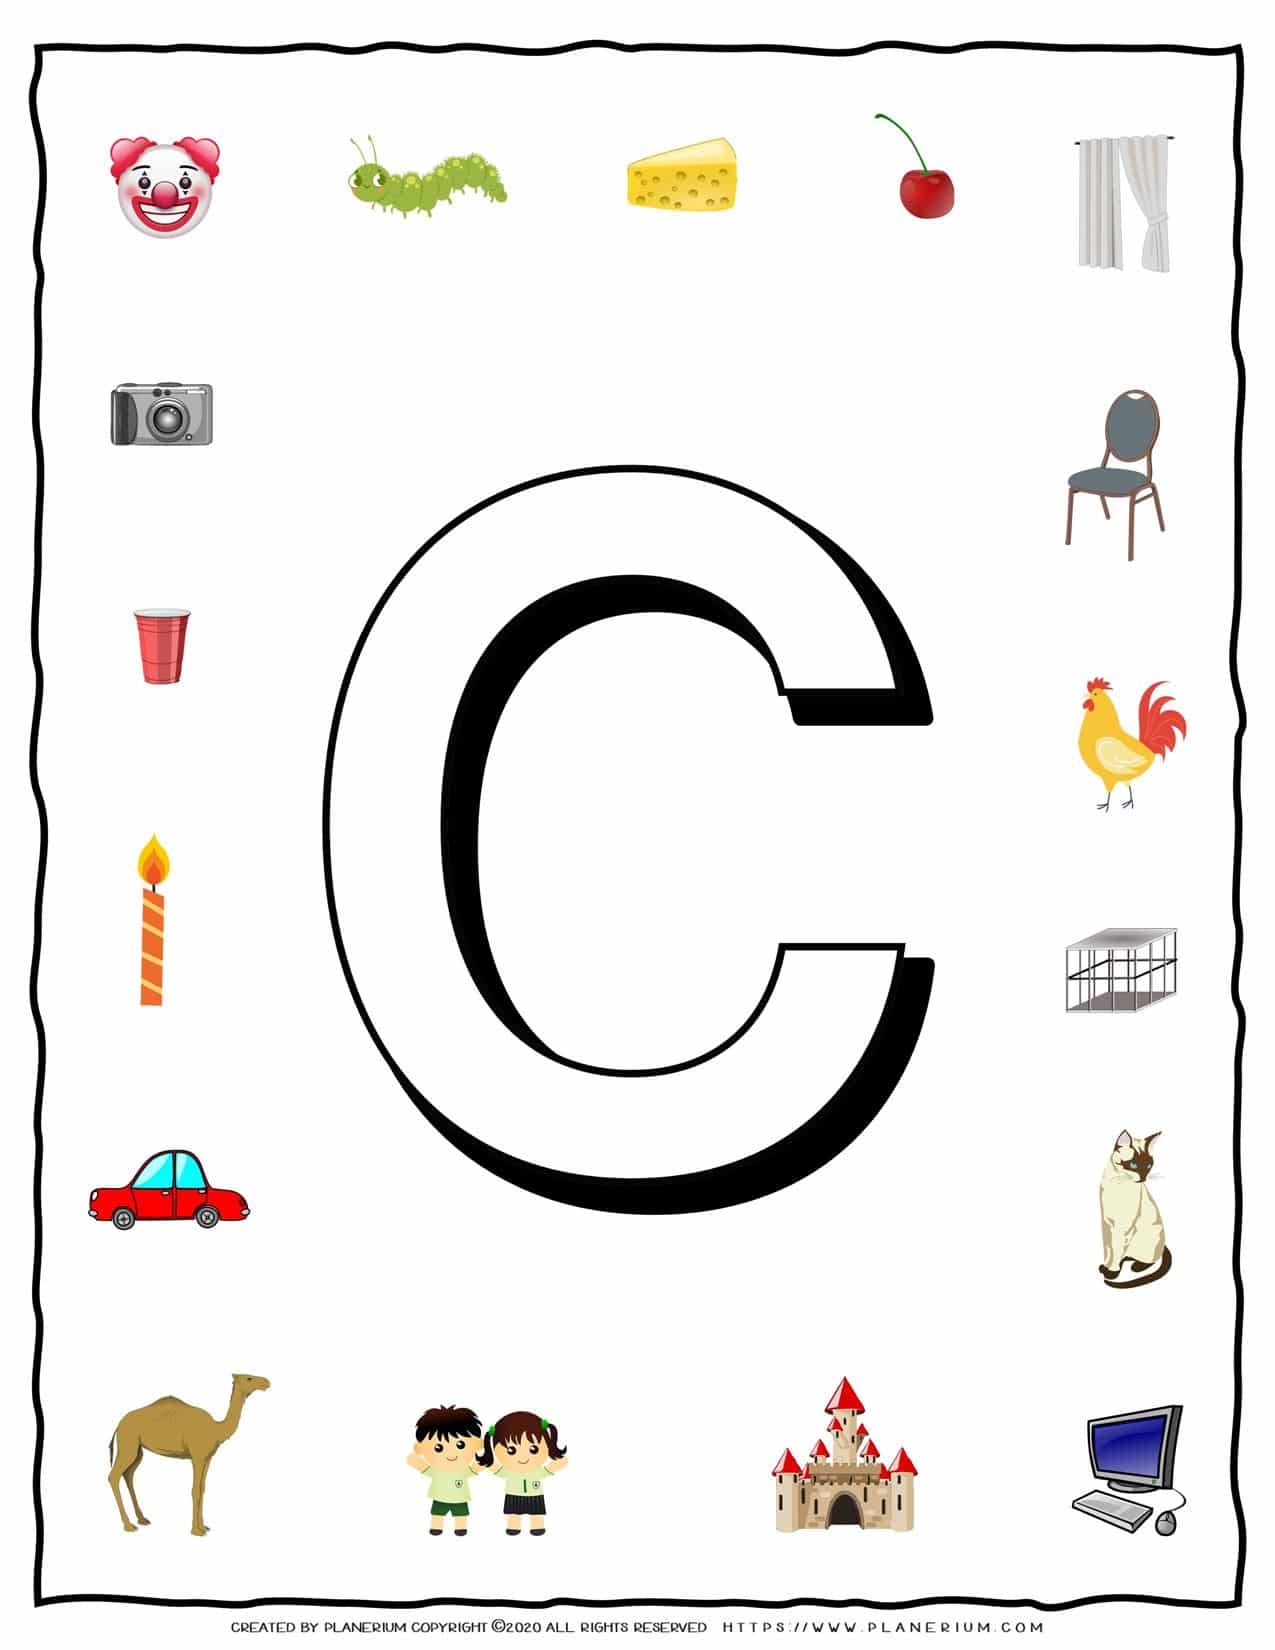 English Alphabet - Objects that starts with C | Planerium